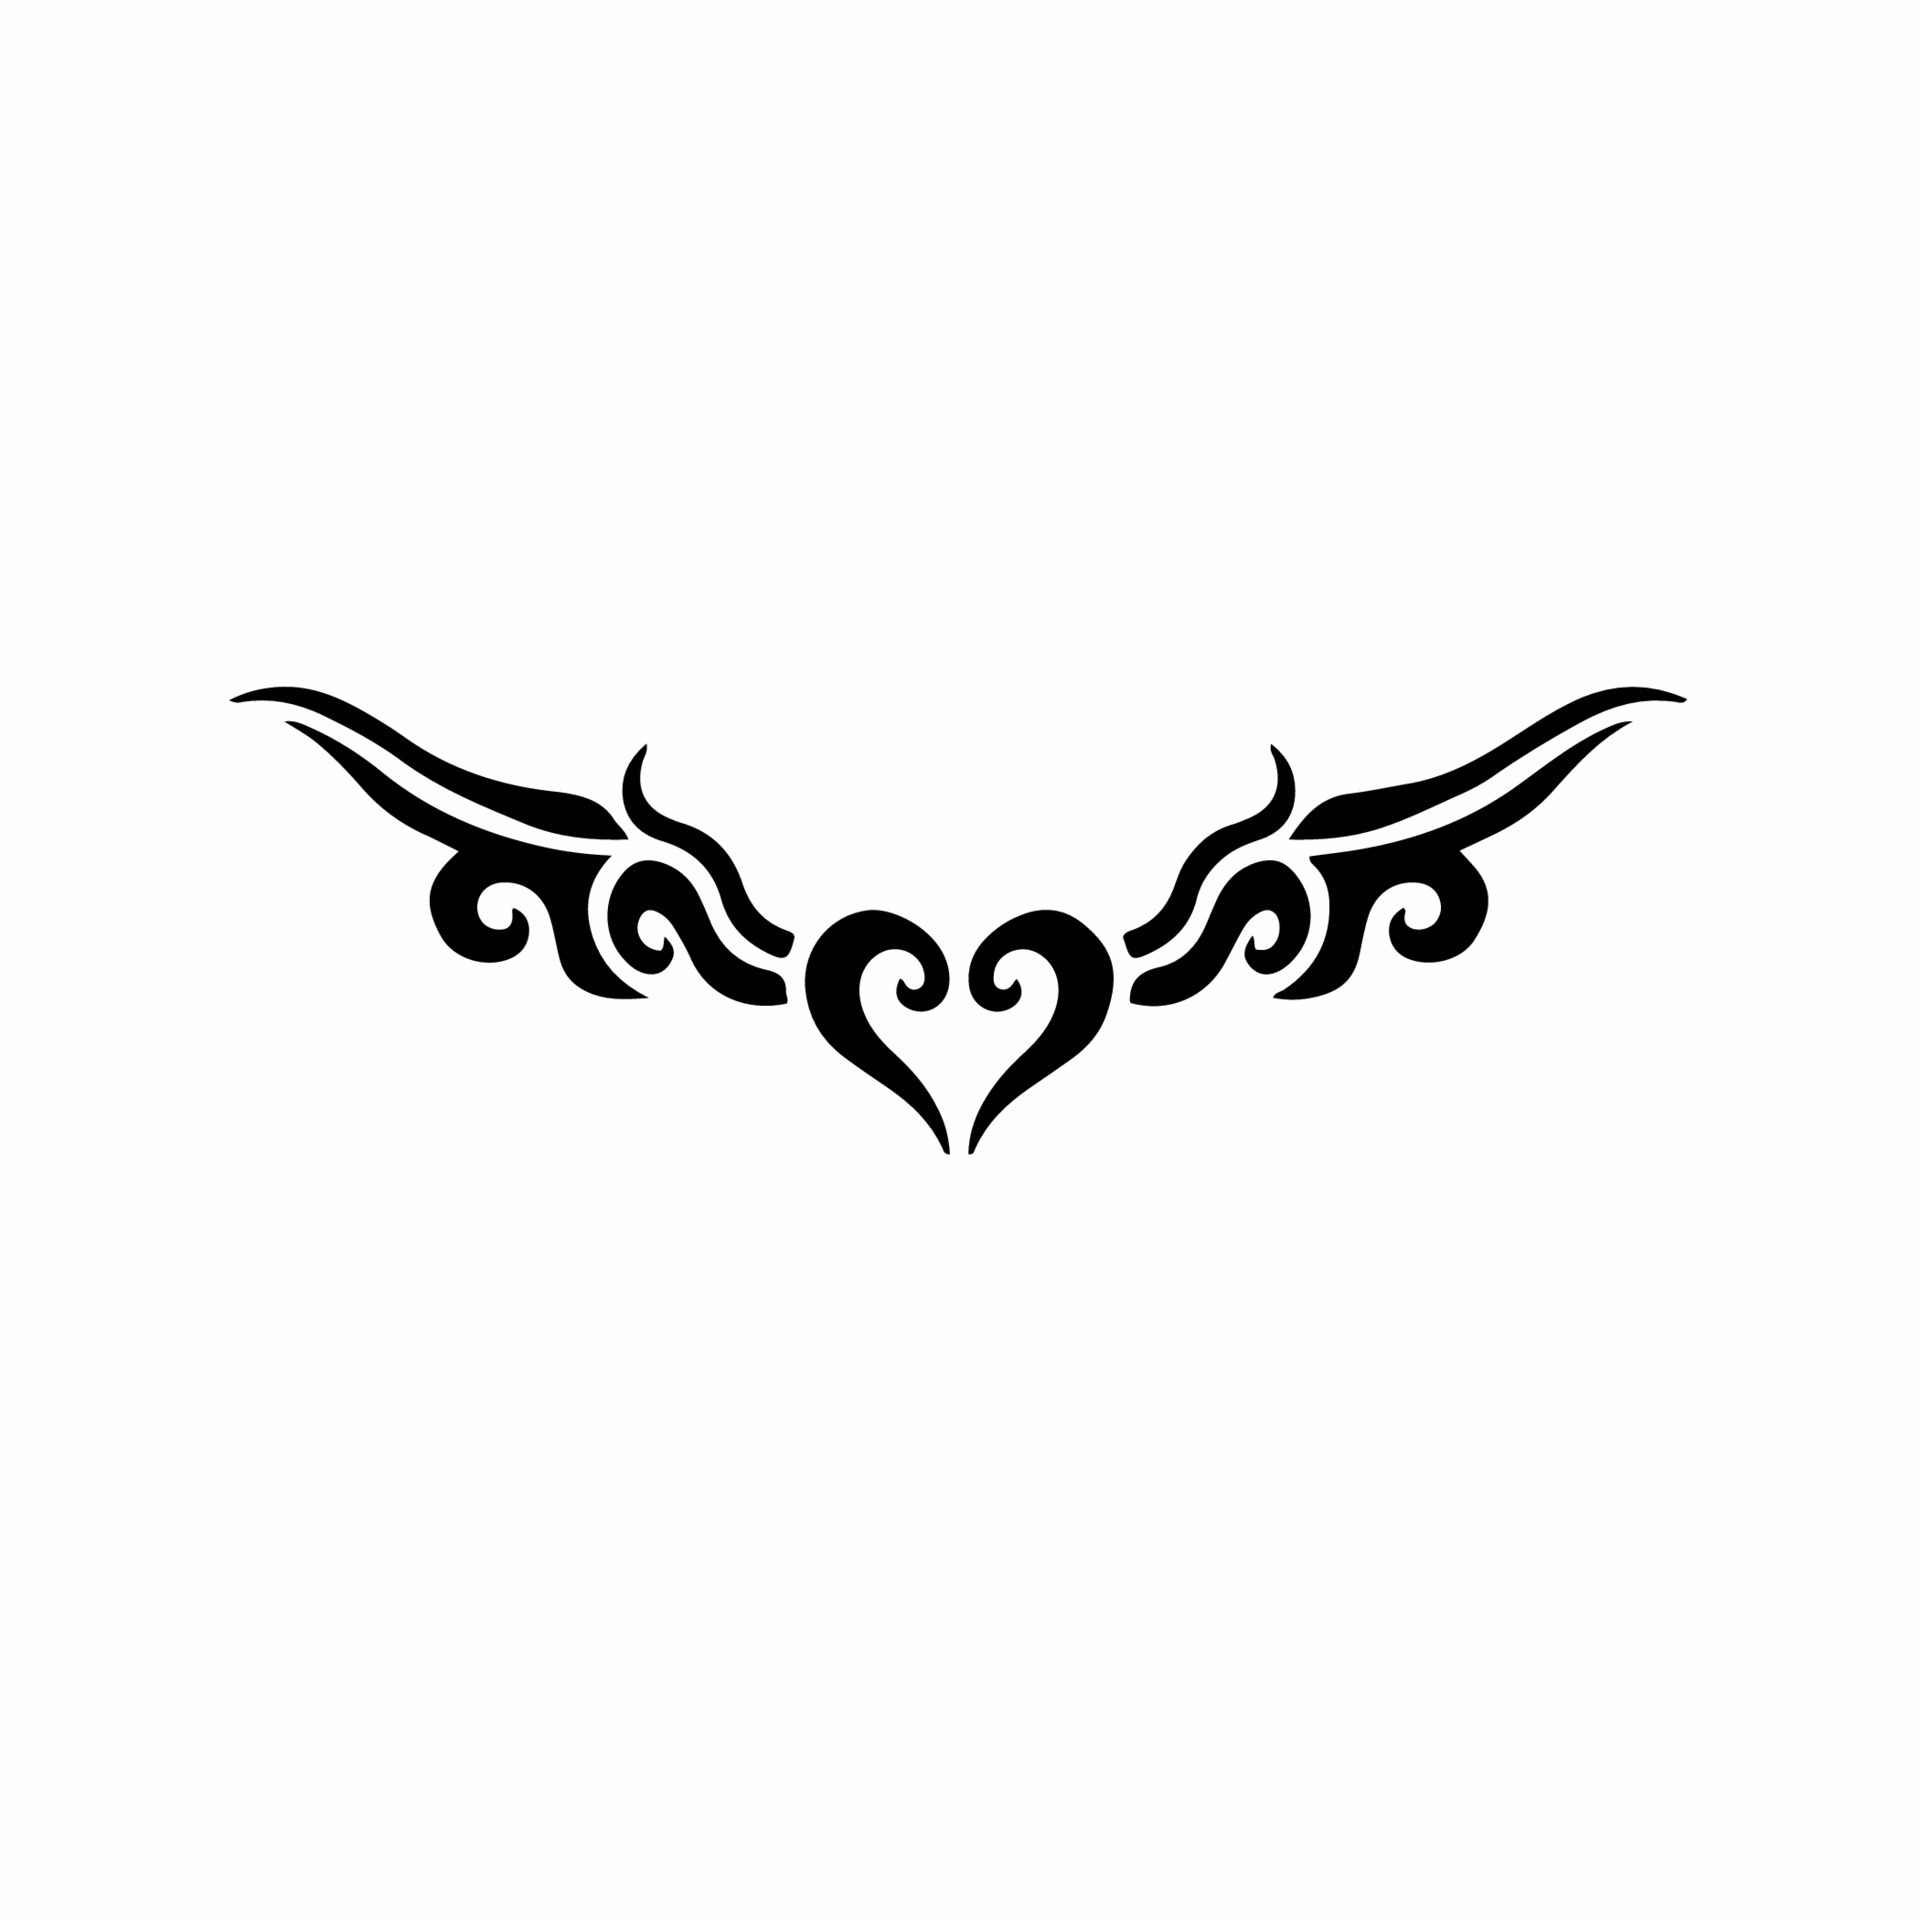 120 Tribal Tattoo For Love Silhouettes Stock Photos Pictures   RoyaltyFree Images  iStock